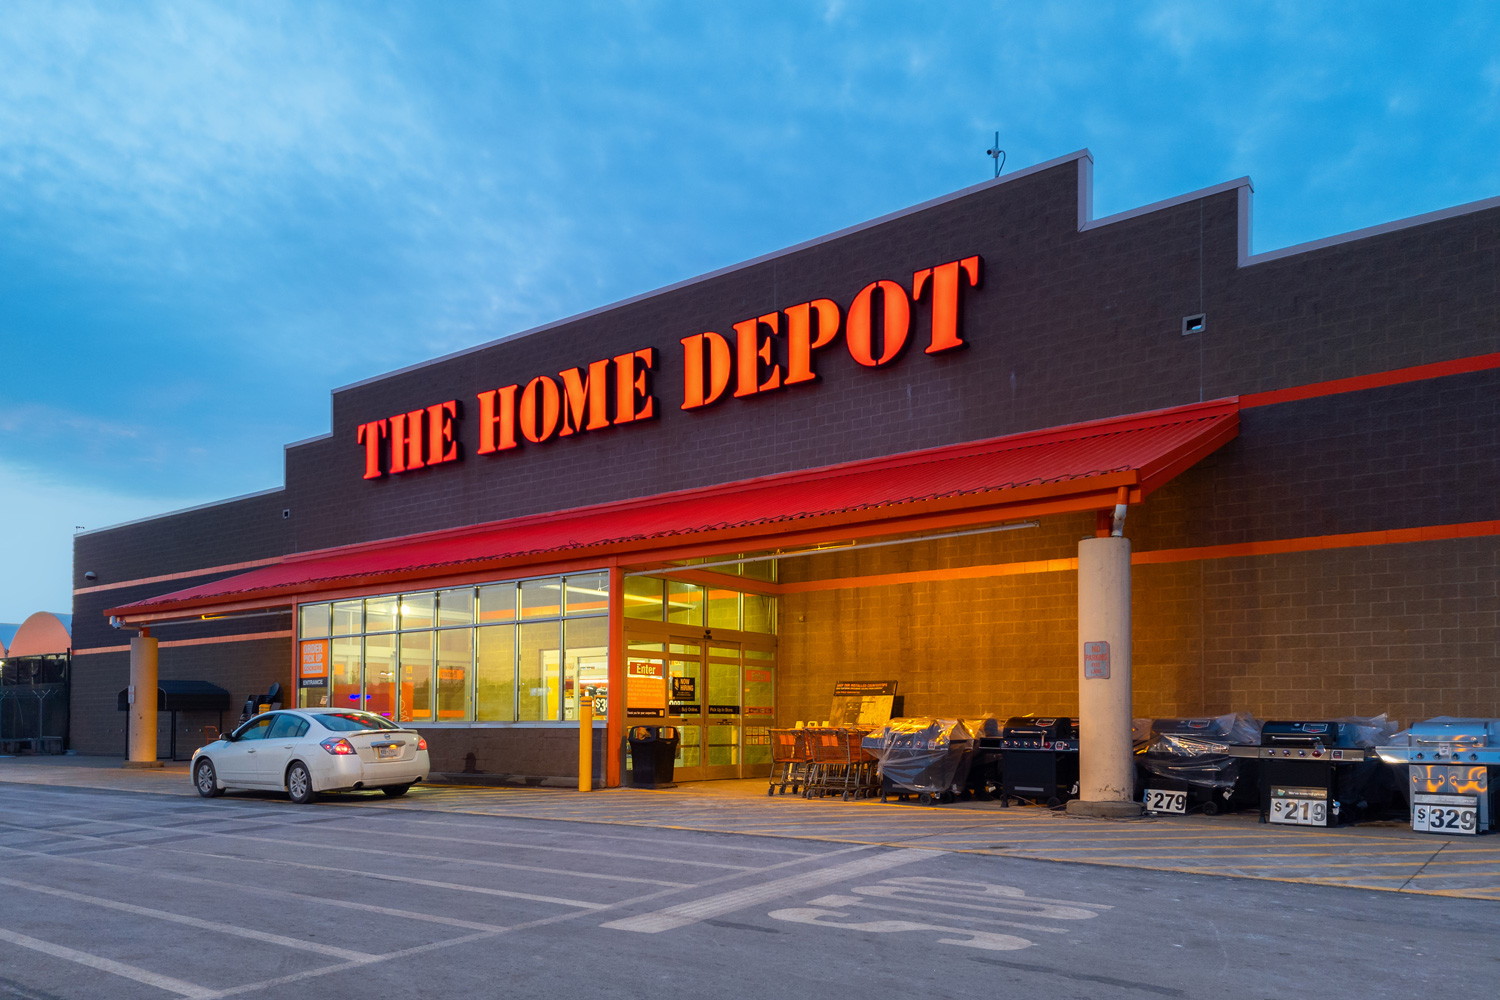 Night Wide View of The Home Depot Building Exterio